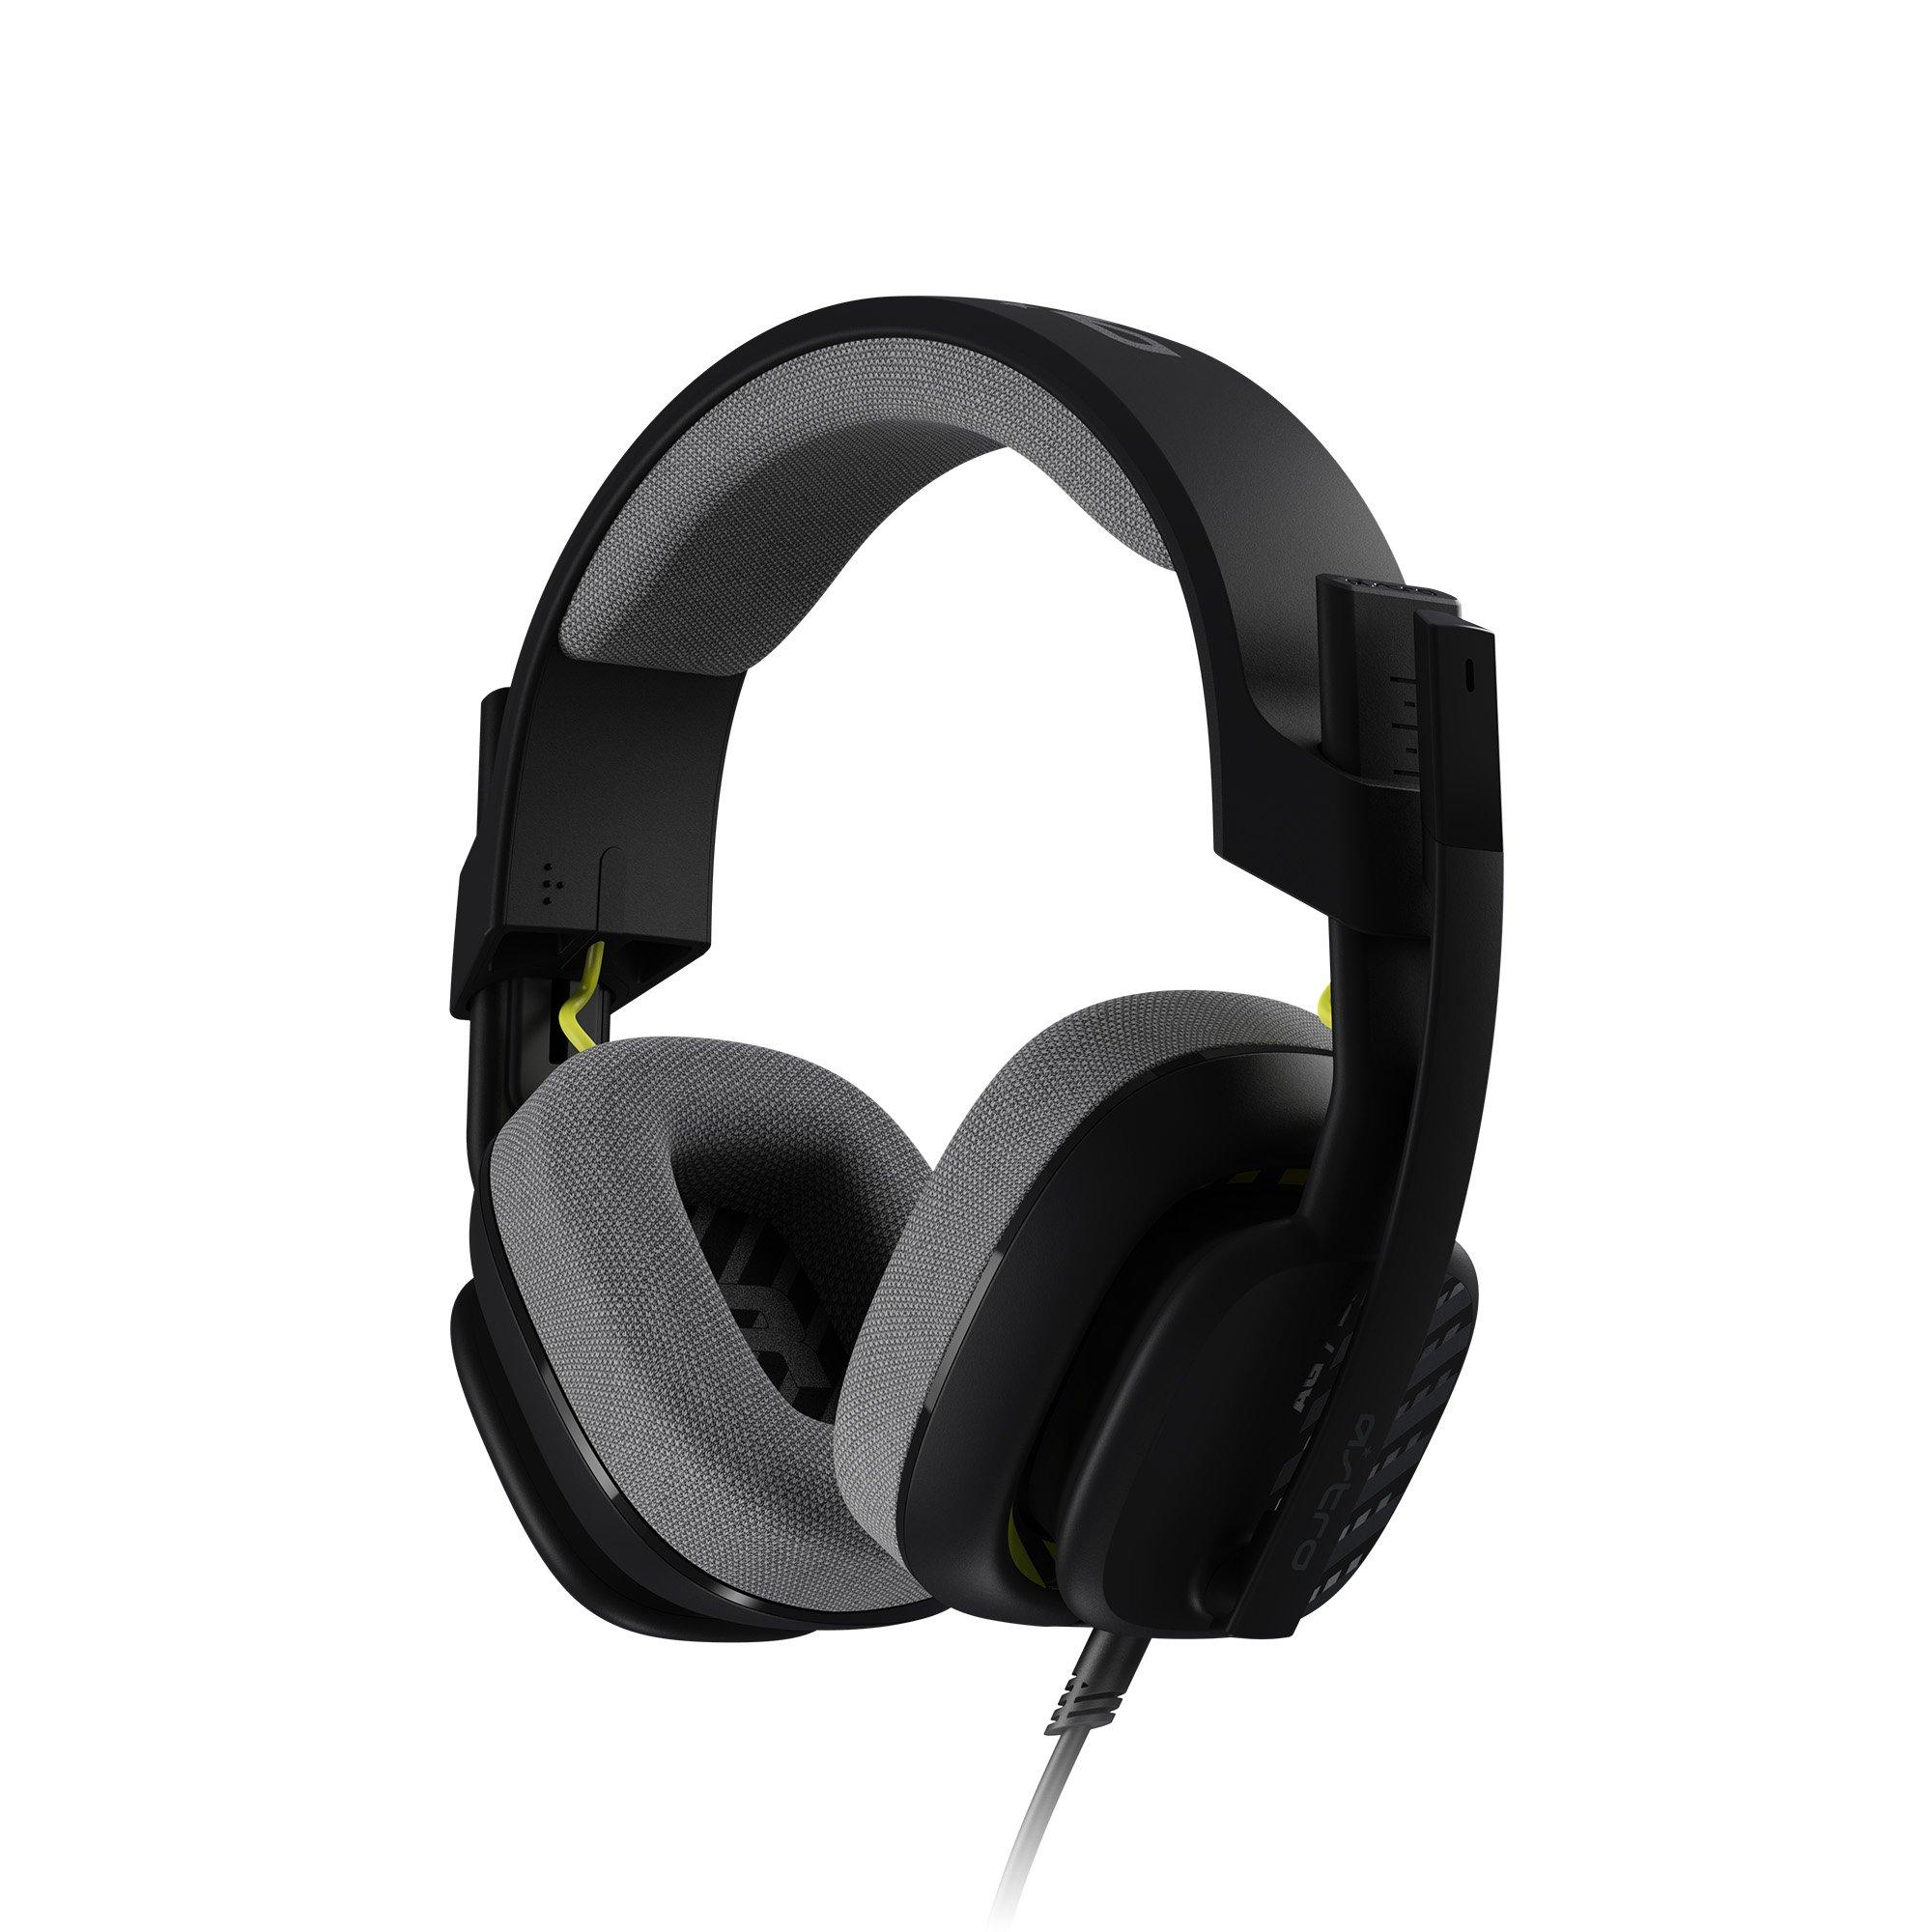 list item 2 of 6 Astro Gaming A10 Gen 2 Wired Headset for PlayStation 5, Xbox Series X/S, and PC